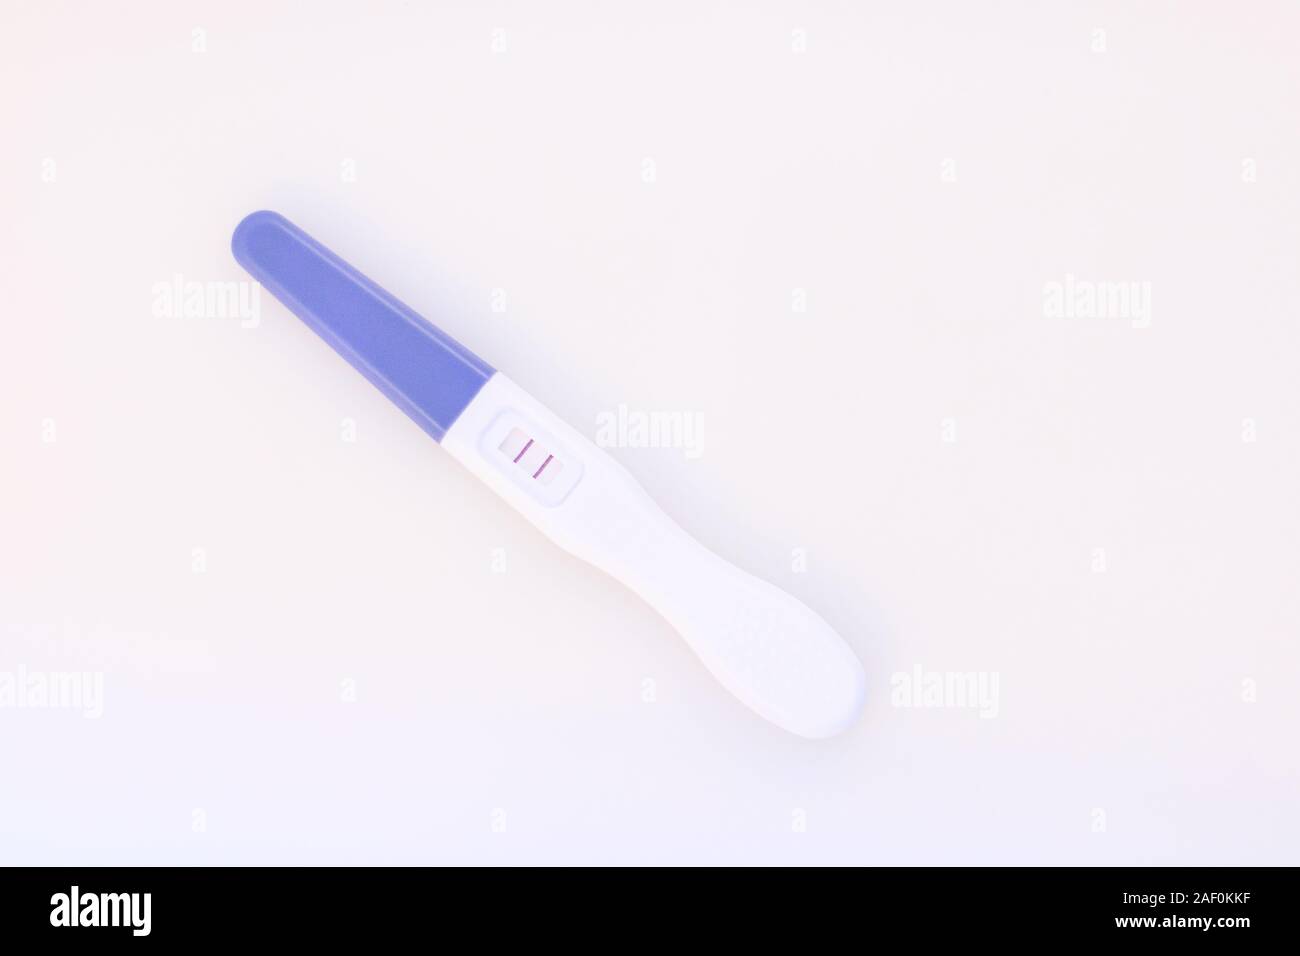 Pregnancy test showing a positive result isolate on white background. Stock Photo